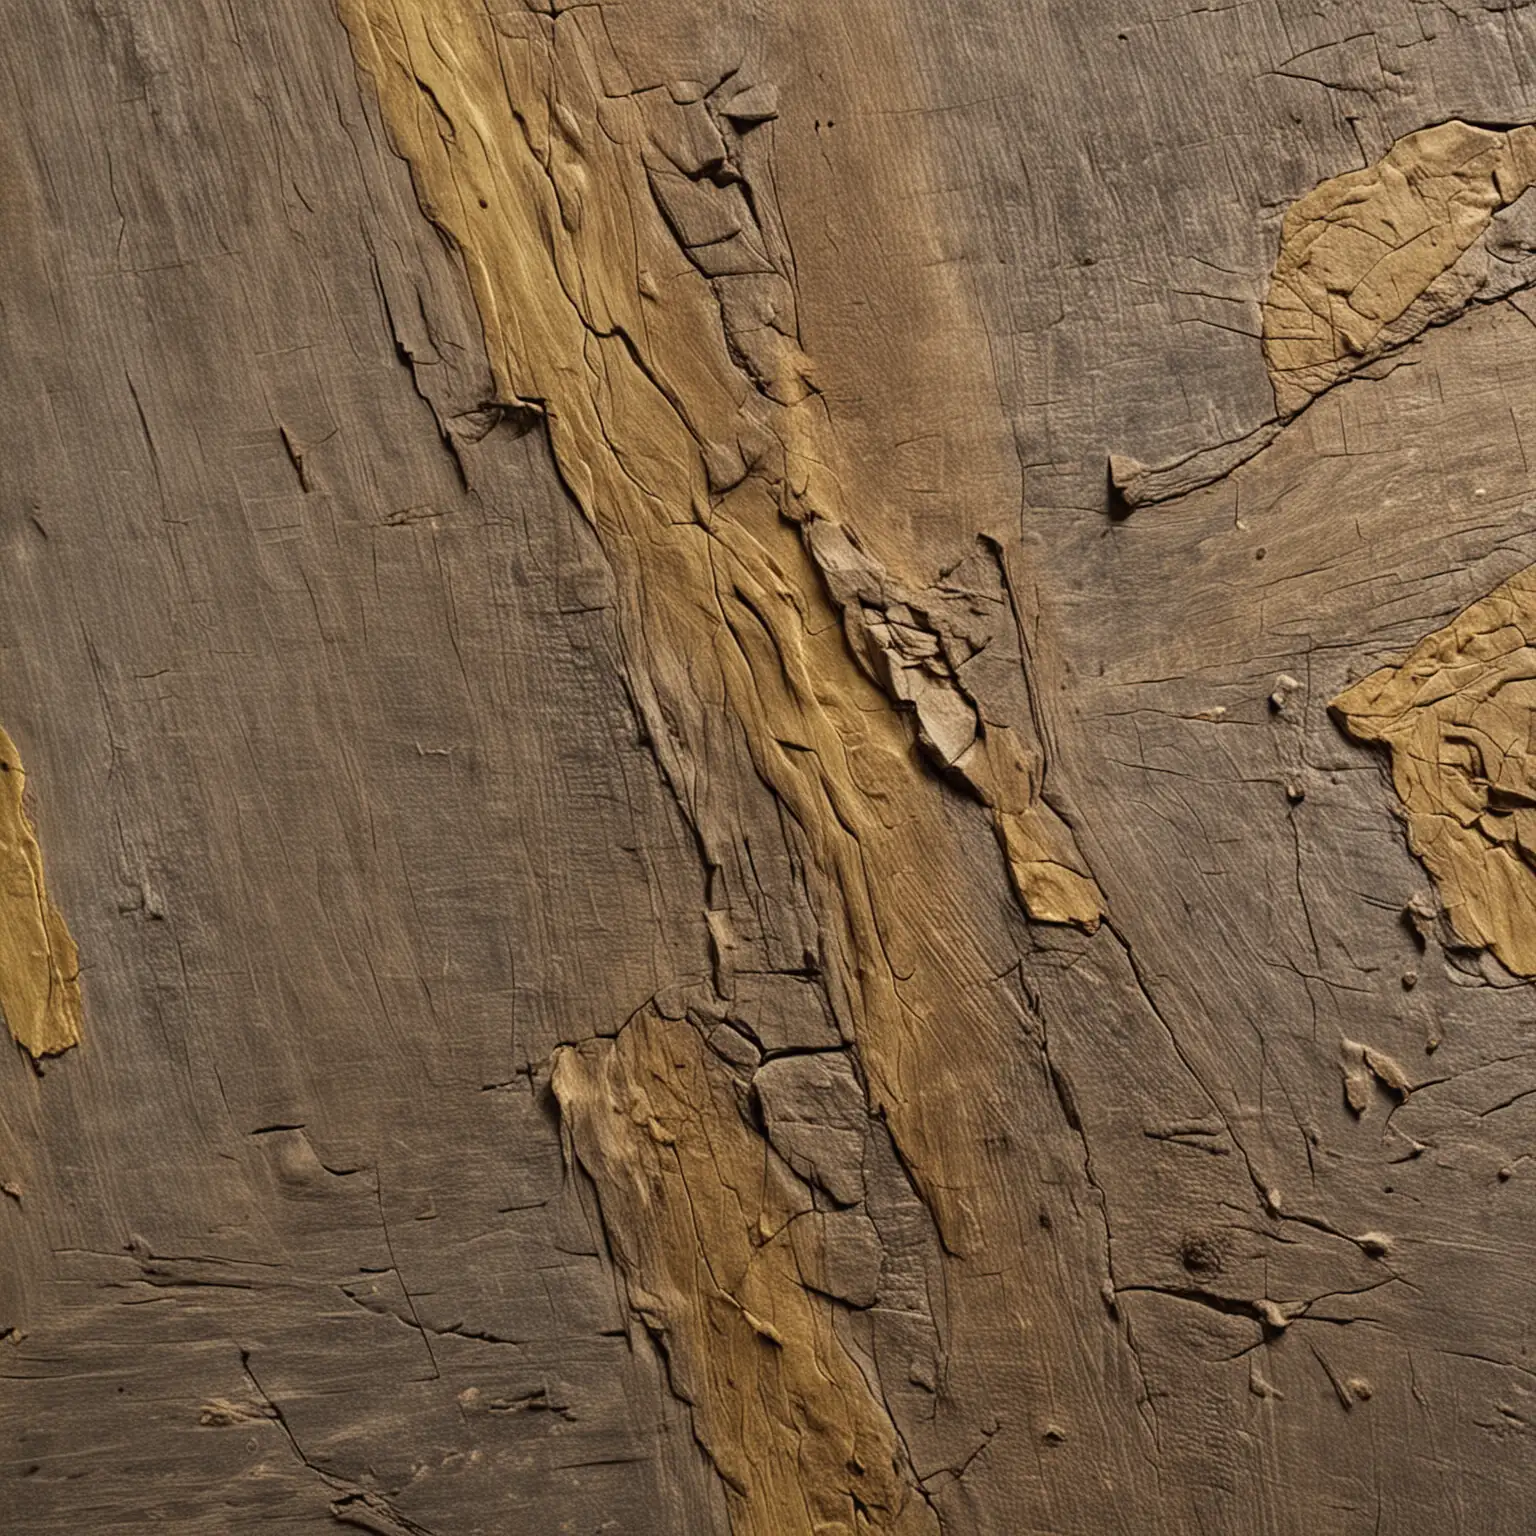  The picture shows the name "Al-Husani" manufactured, looking like a compound, cracked and weathered material, perhaps made of wood or a similar substance. The surface is brownish gray with some golden or yellow areas, creating a fascinating and eye-catching appearance. The overall design and feel give it a rustic, natural impression.